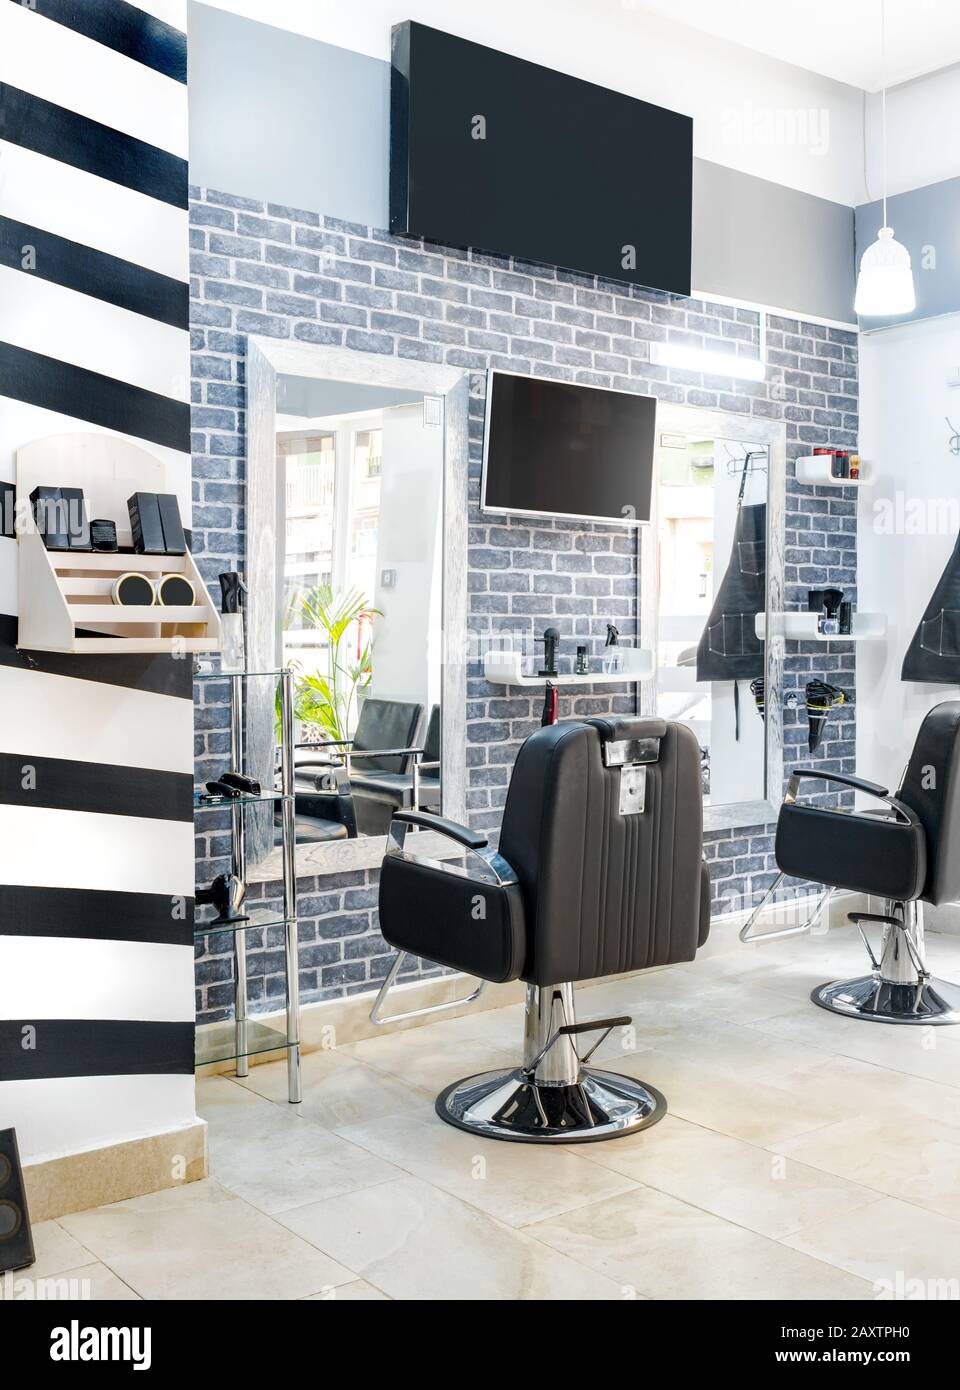 Modern bright beauty salon. Hair salon interior business with industrial  minimal look. Black and white decoration with mirrors, chairs,tv screen and  m Stock Photo - Alamy